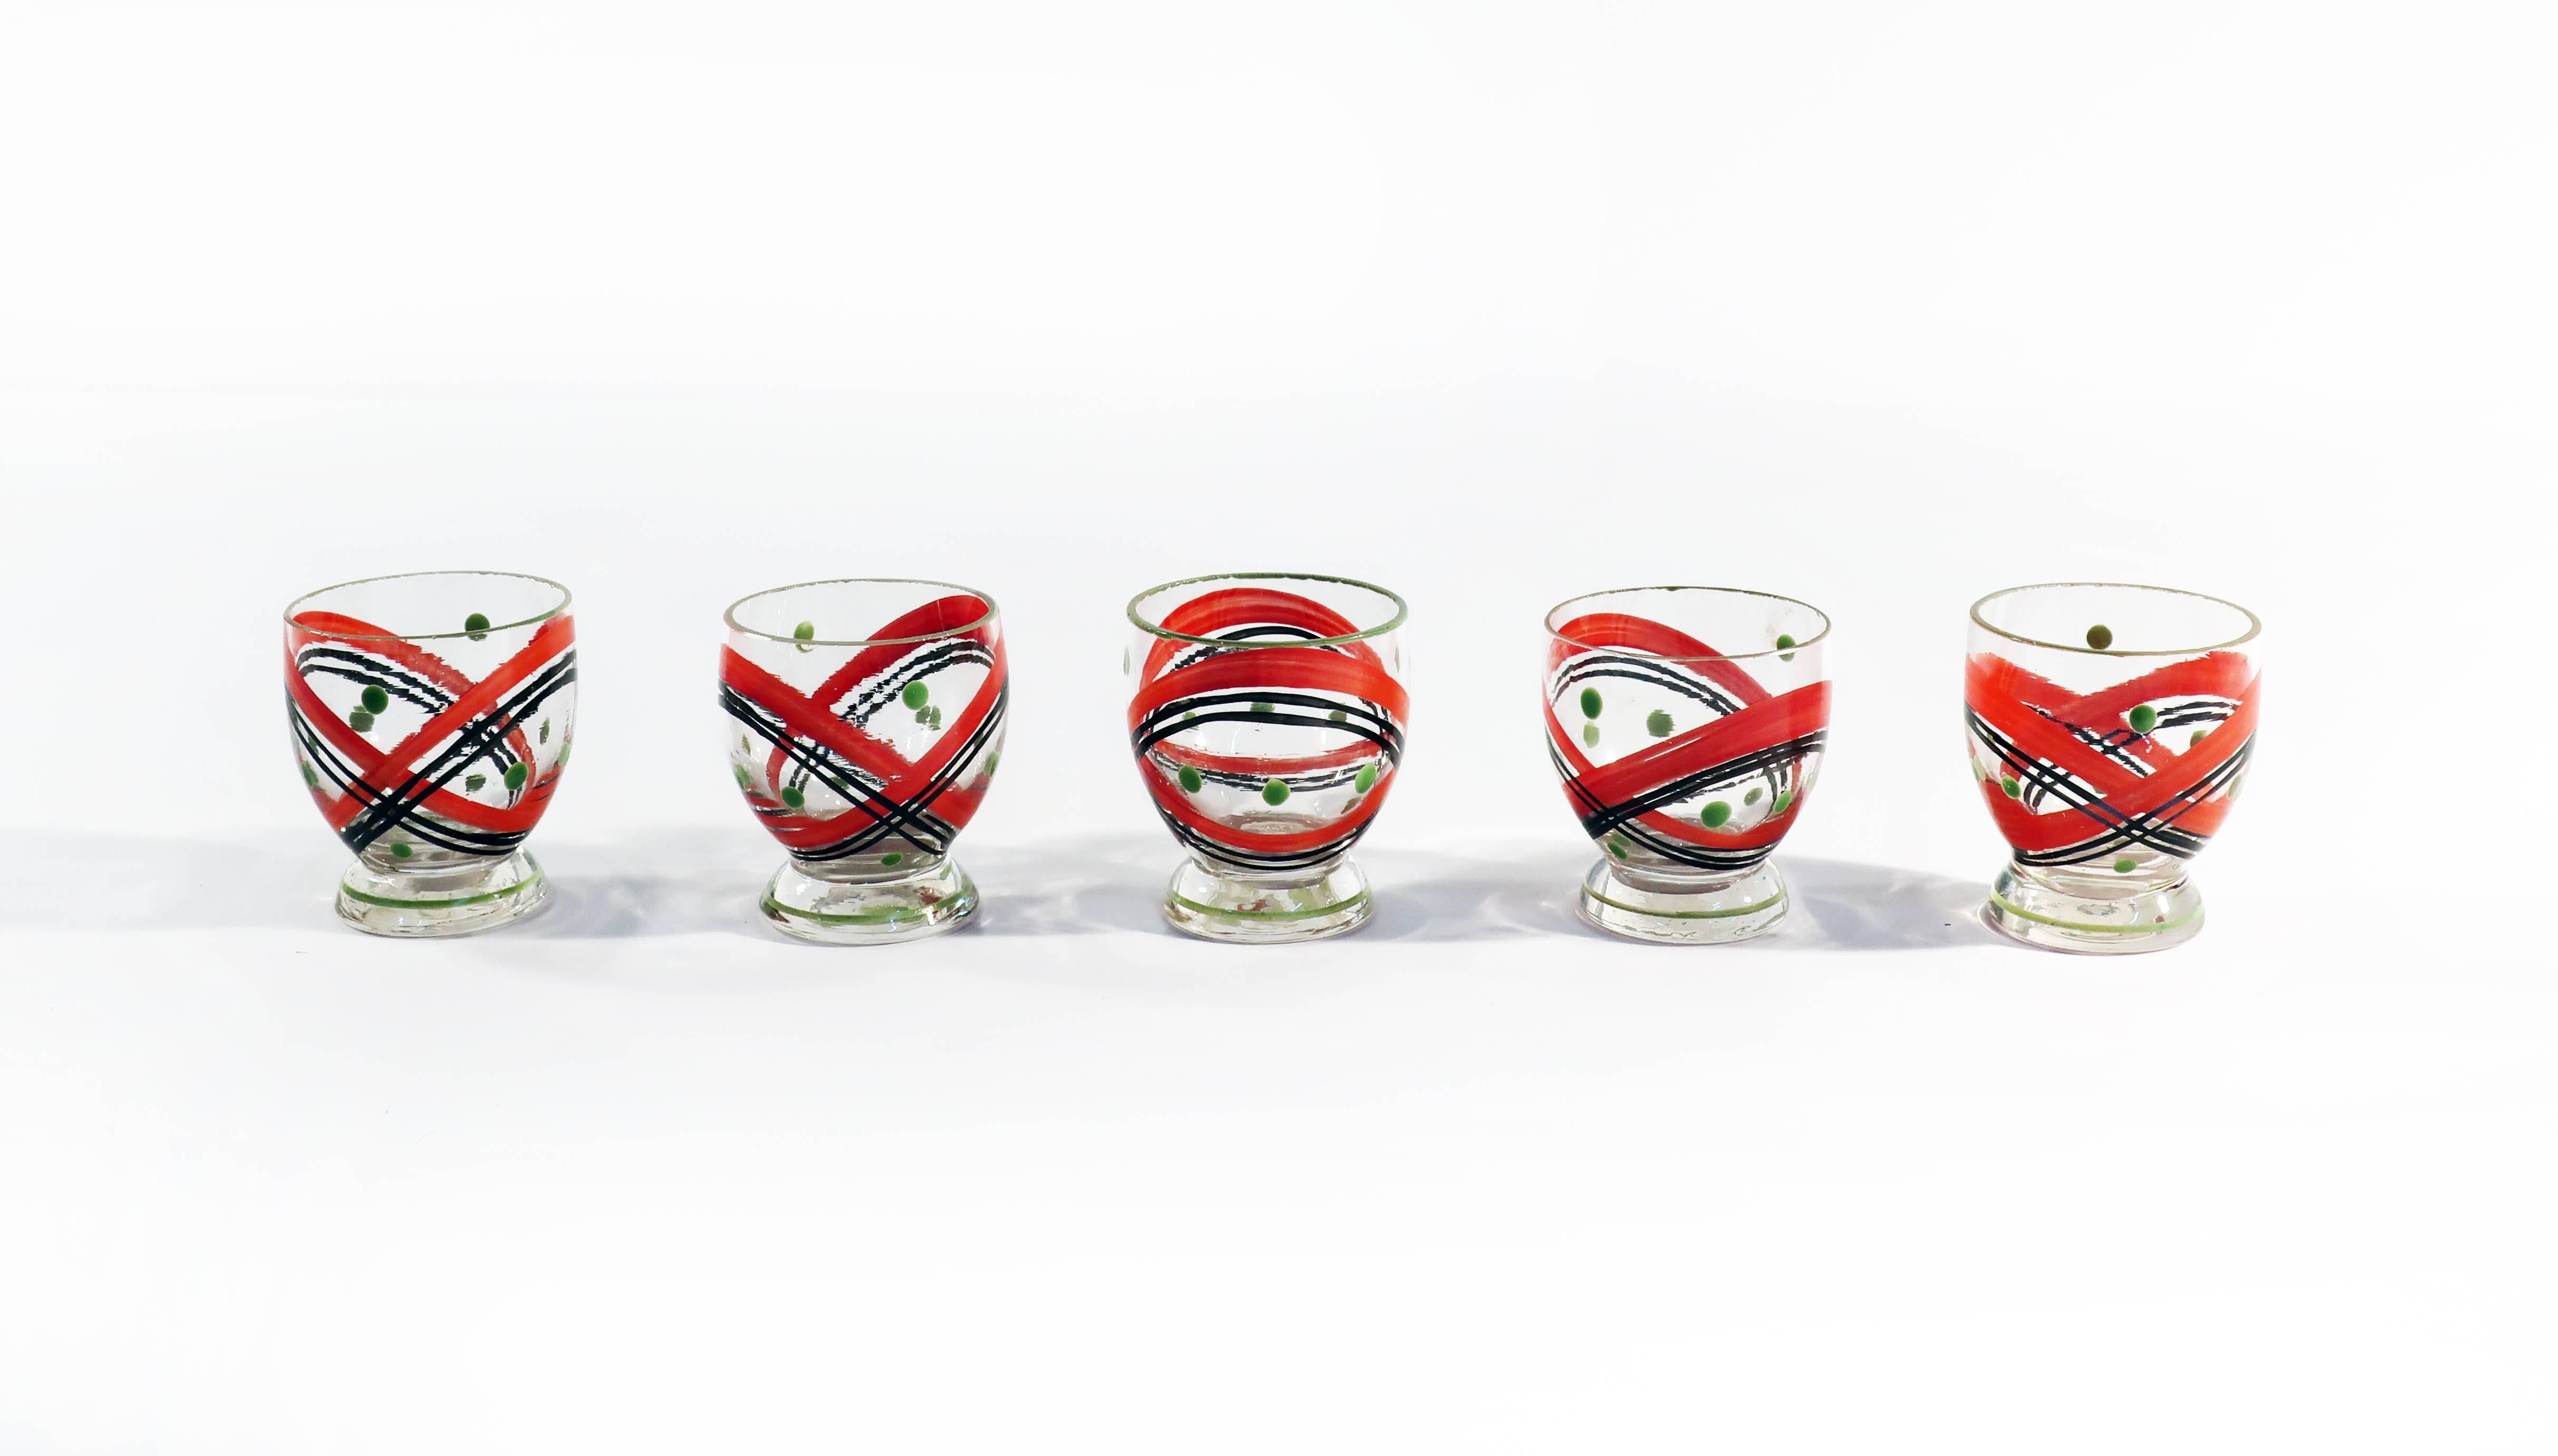 With clear glass and red, black, and green coloring, this midcentury Czech glass decanter set says nothing if not 